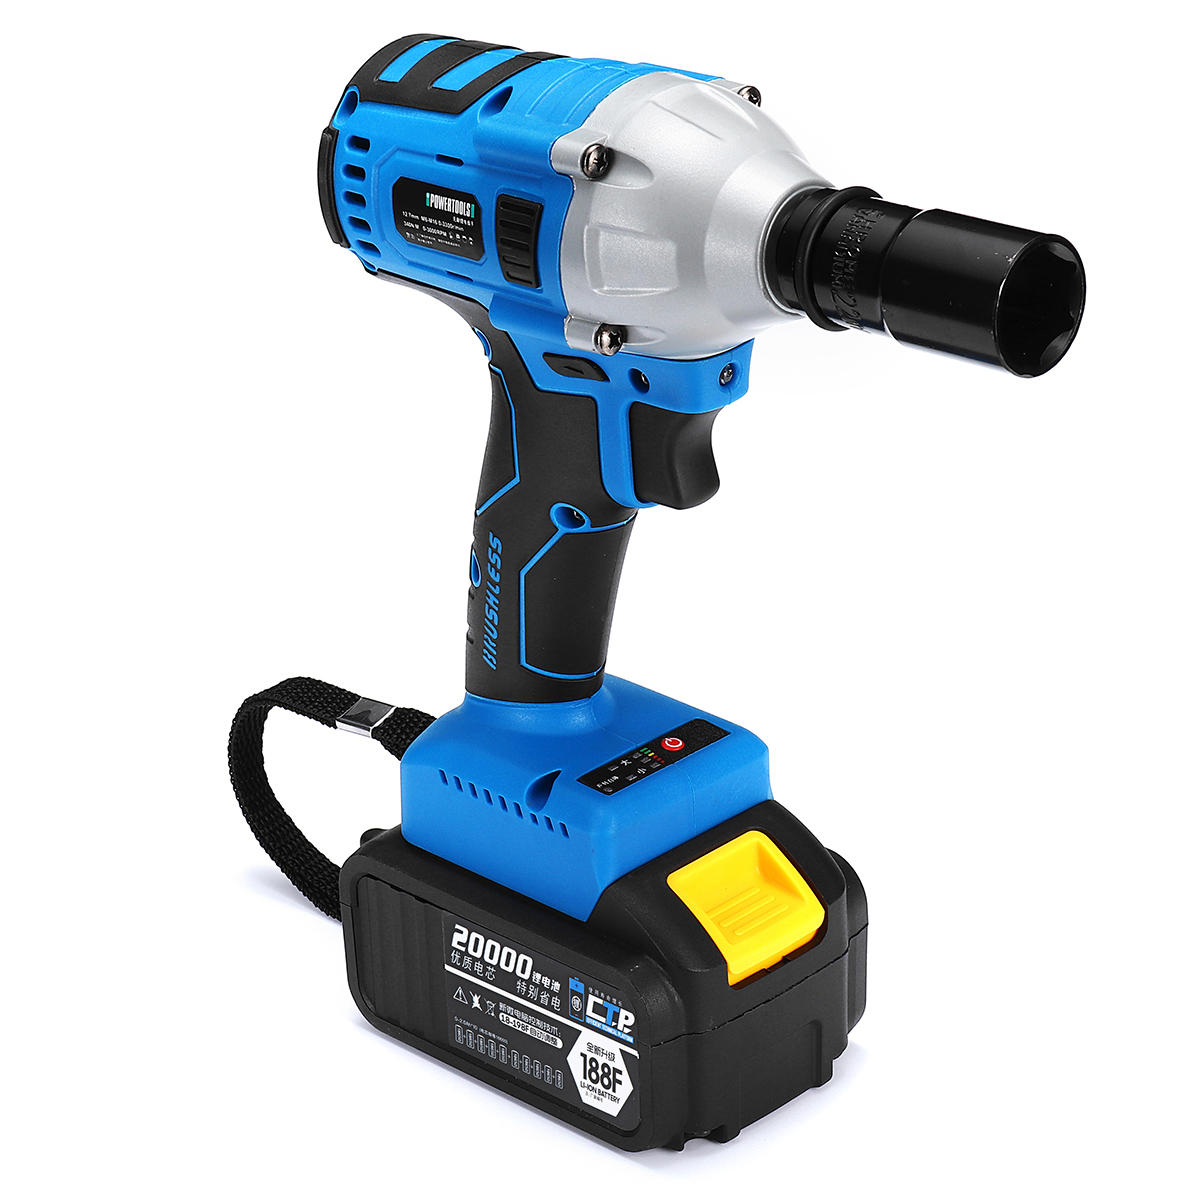 15000-30000mAH Cordless Impact Wrench Brushless Electric Wrench 1/2'' Socket Tool